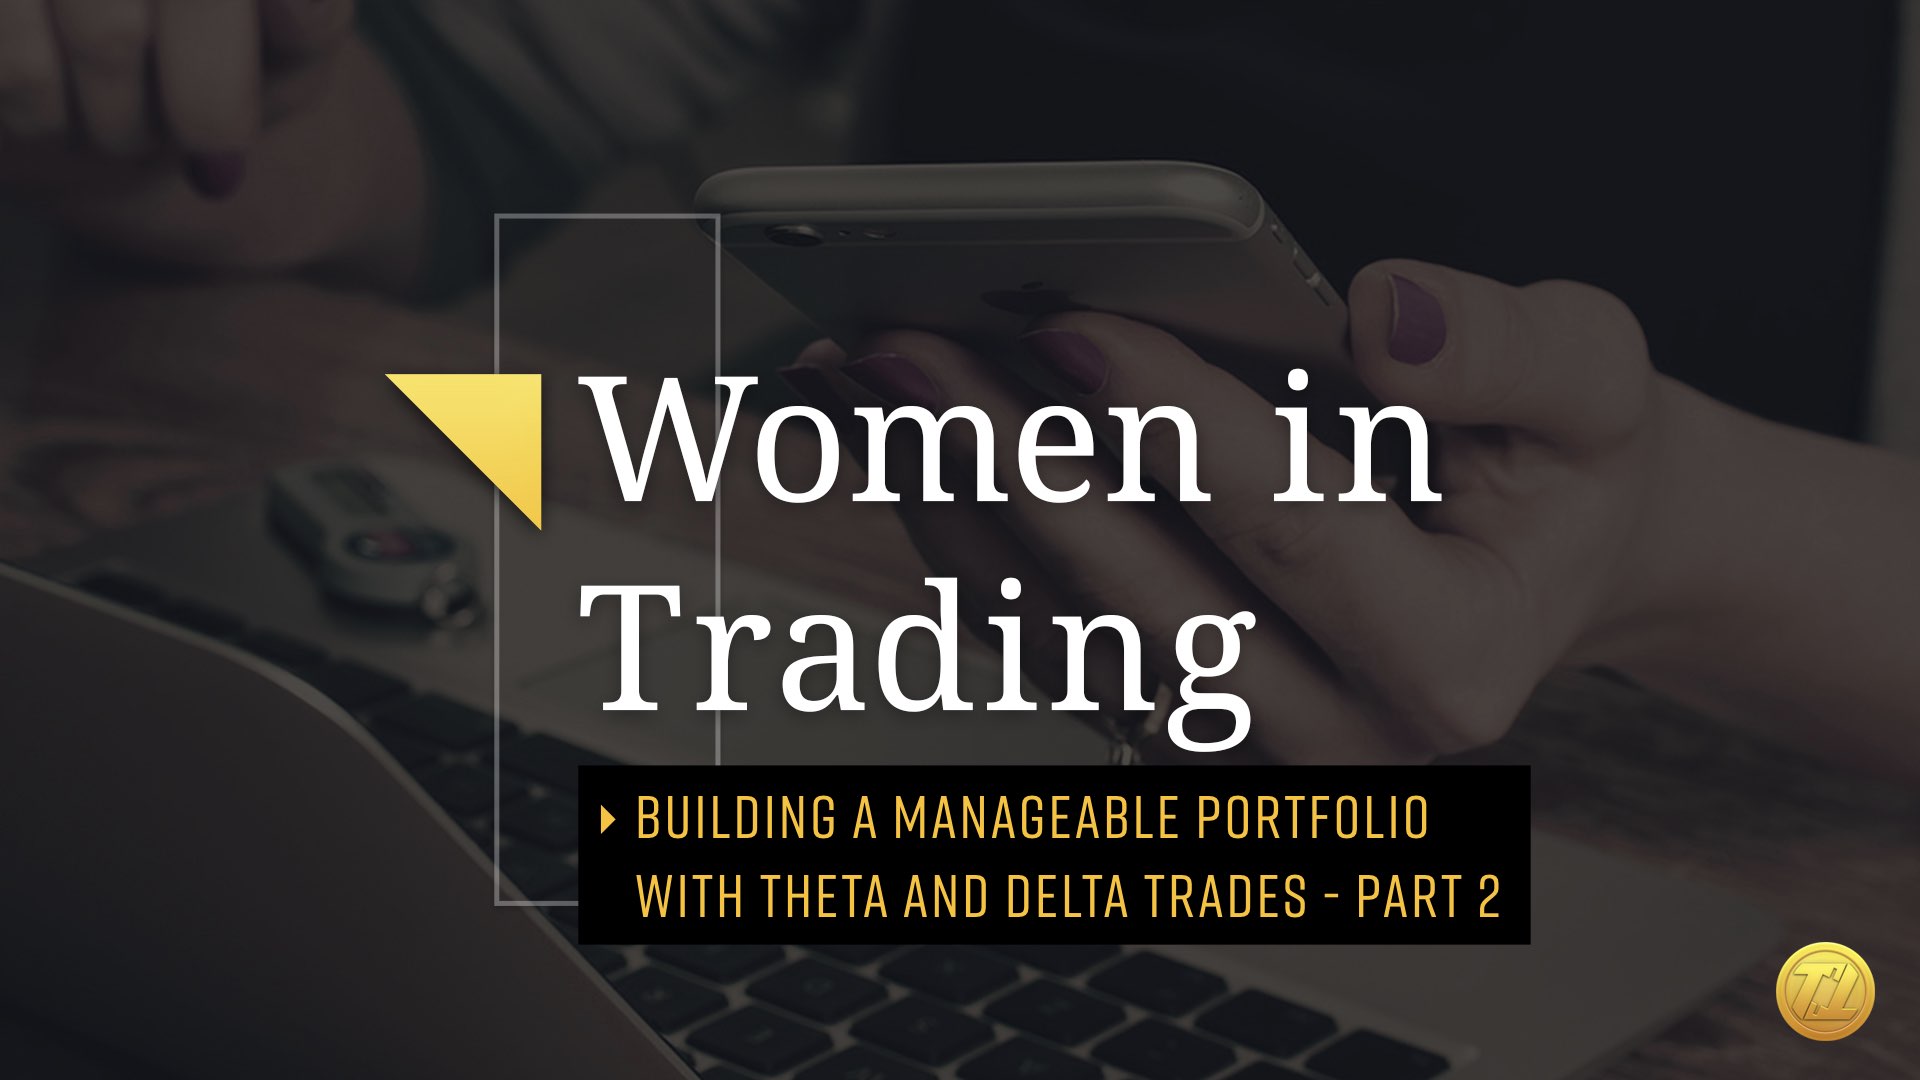 Women in Trading Mastermind Group February 2020 Meeting - Building a manageable portfolio with Theta and Delta trades - Part 2